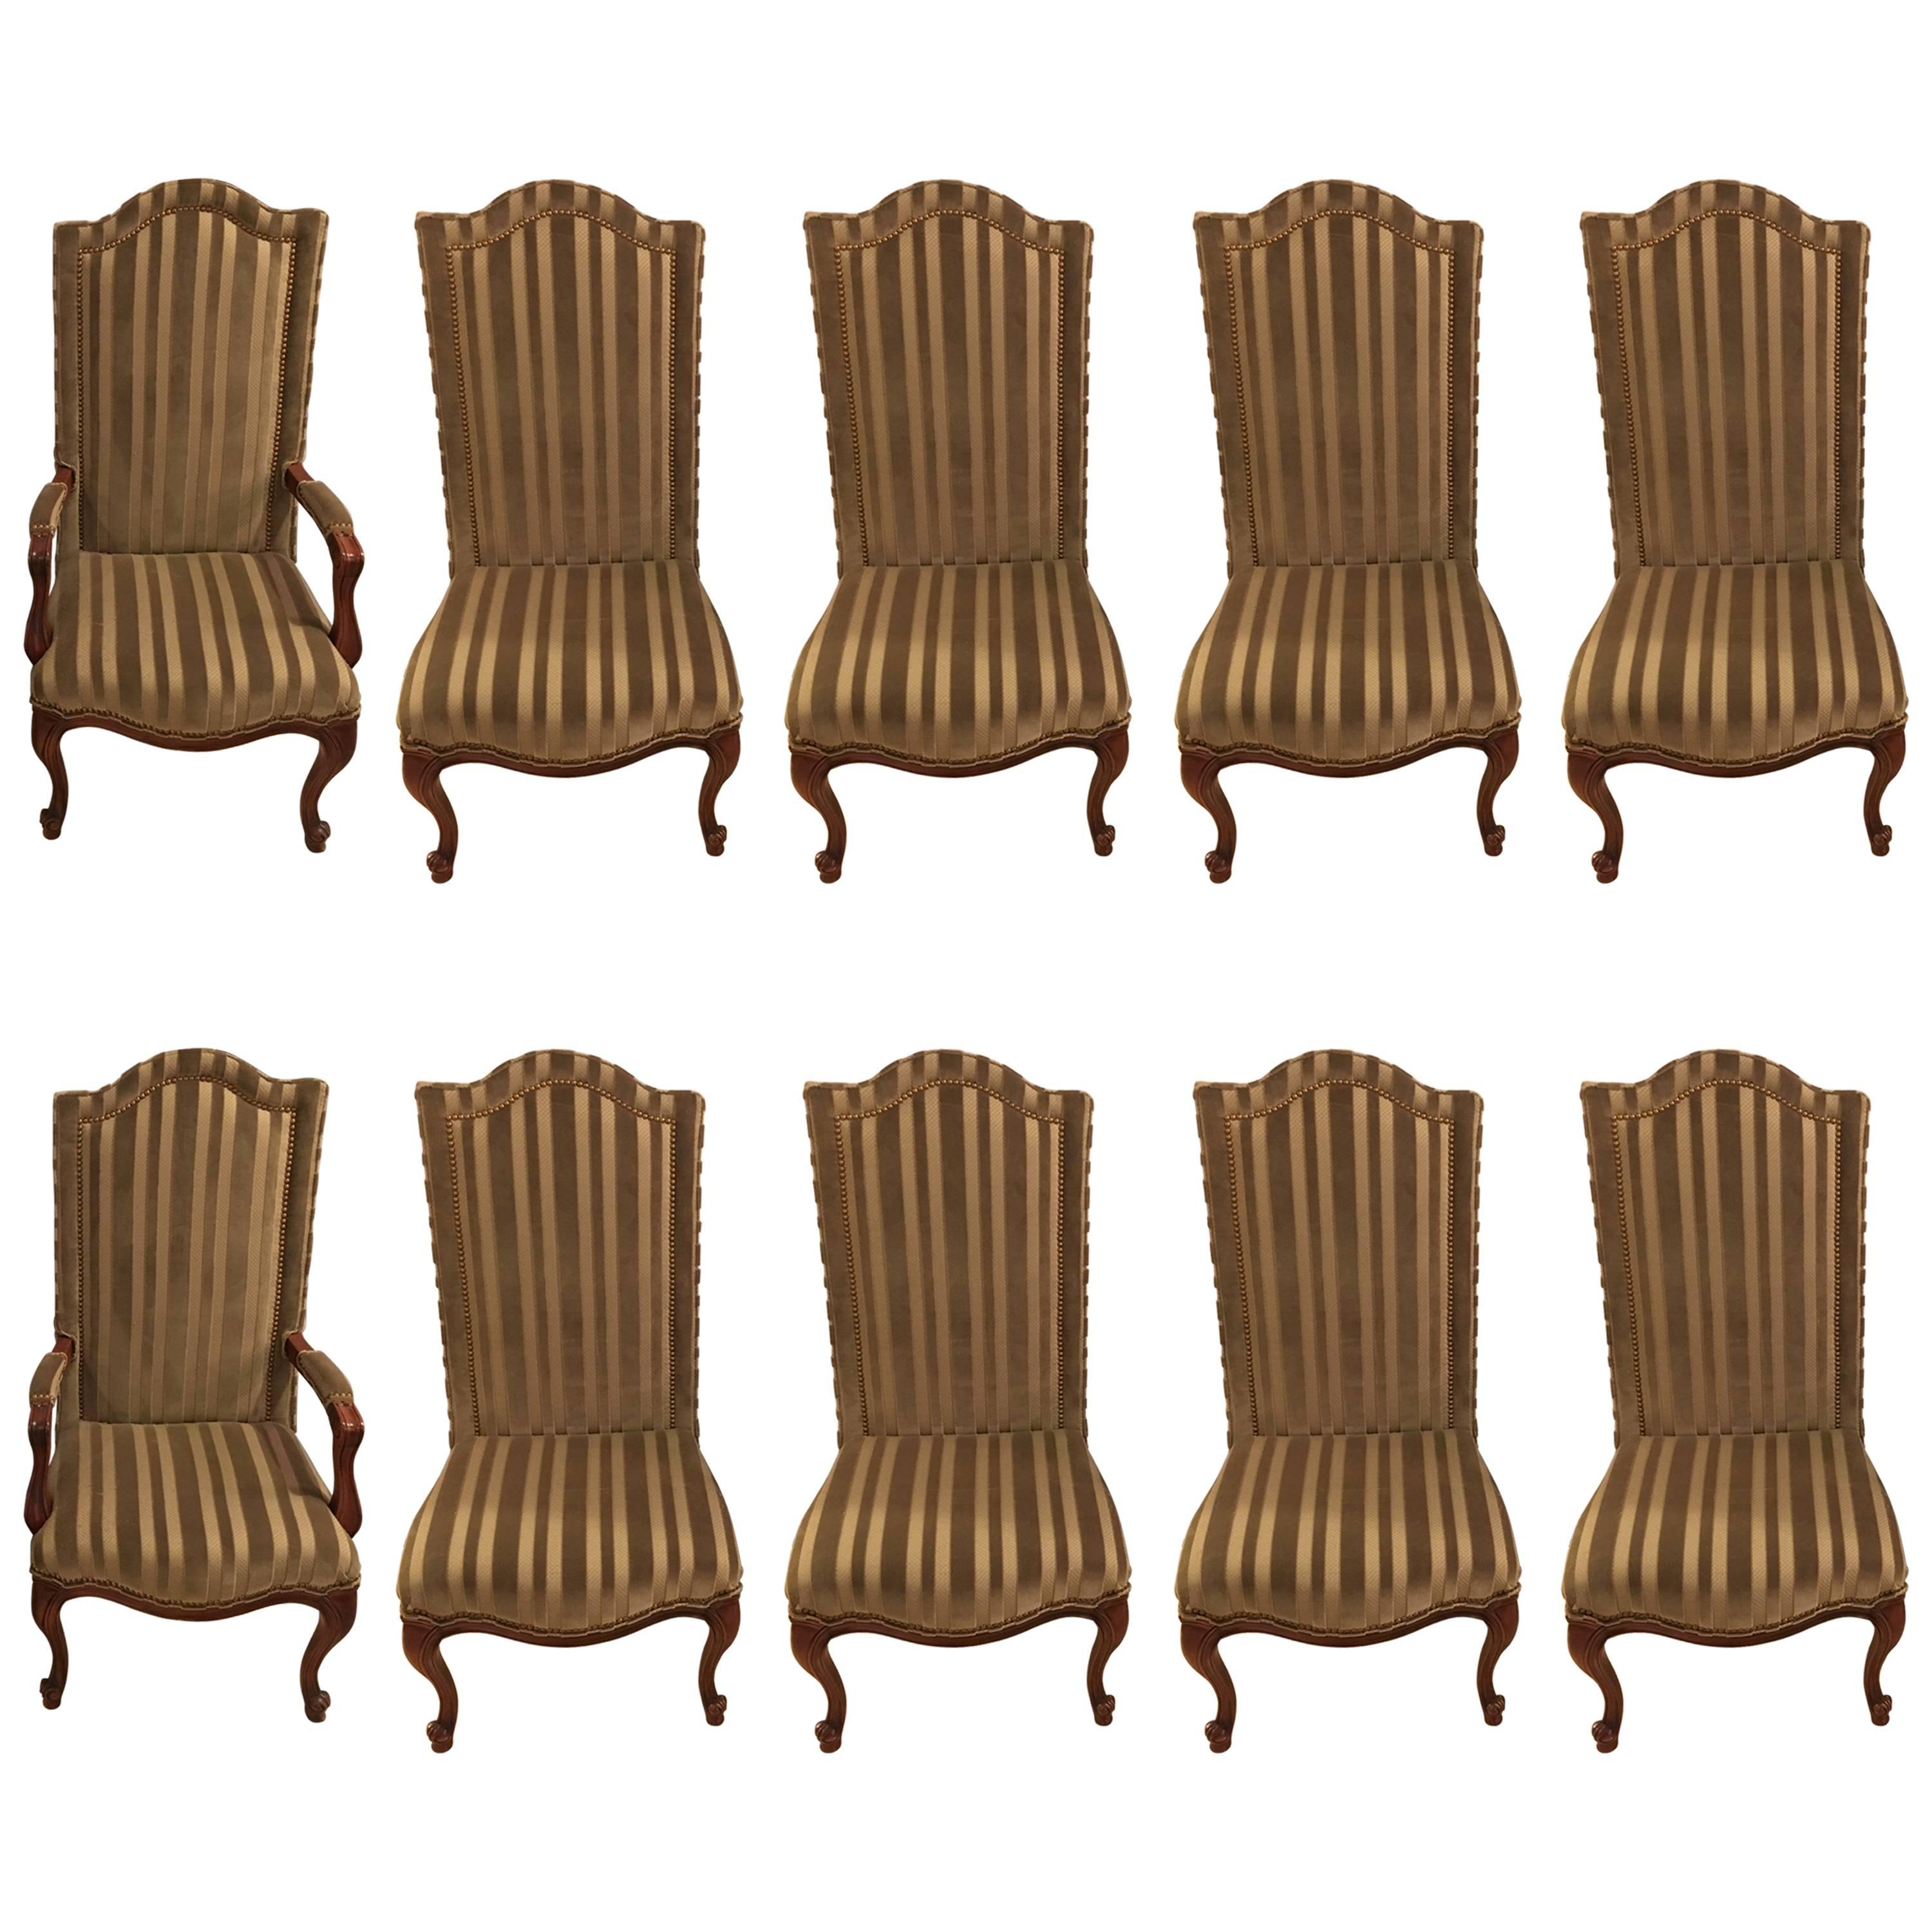 Set of Ten Harden Dining Room Chairs